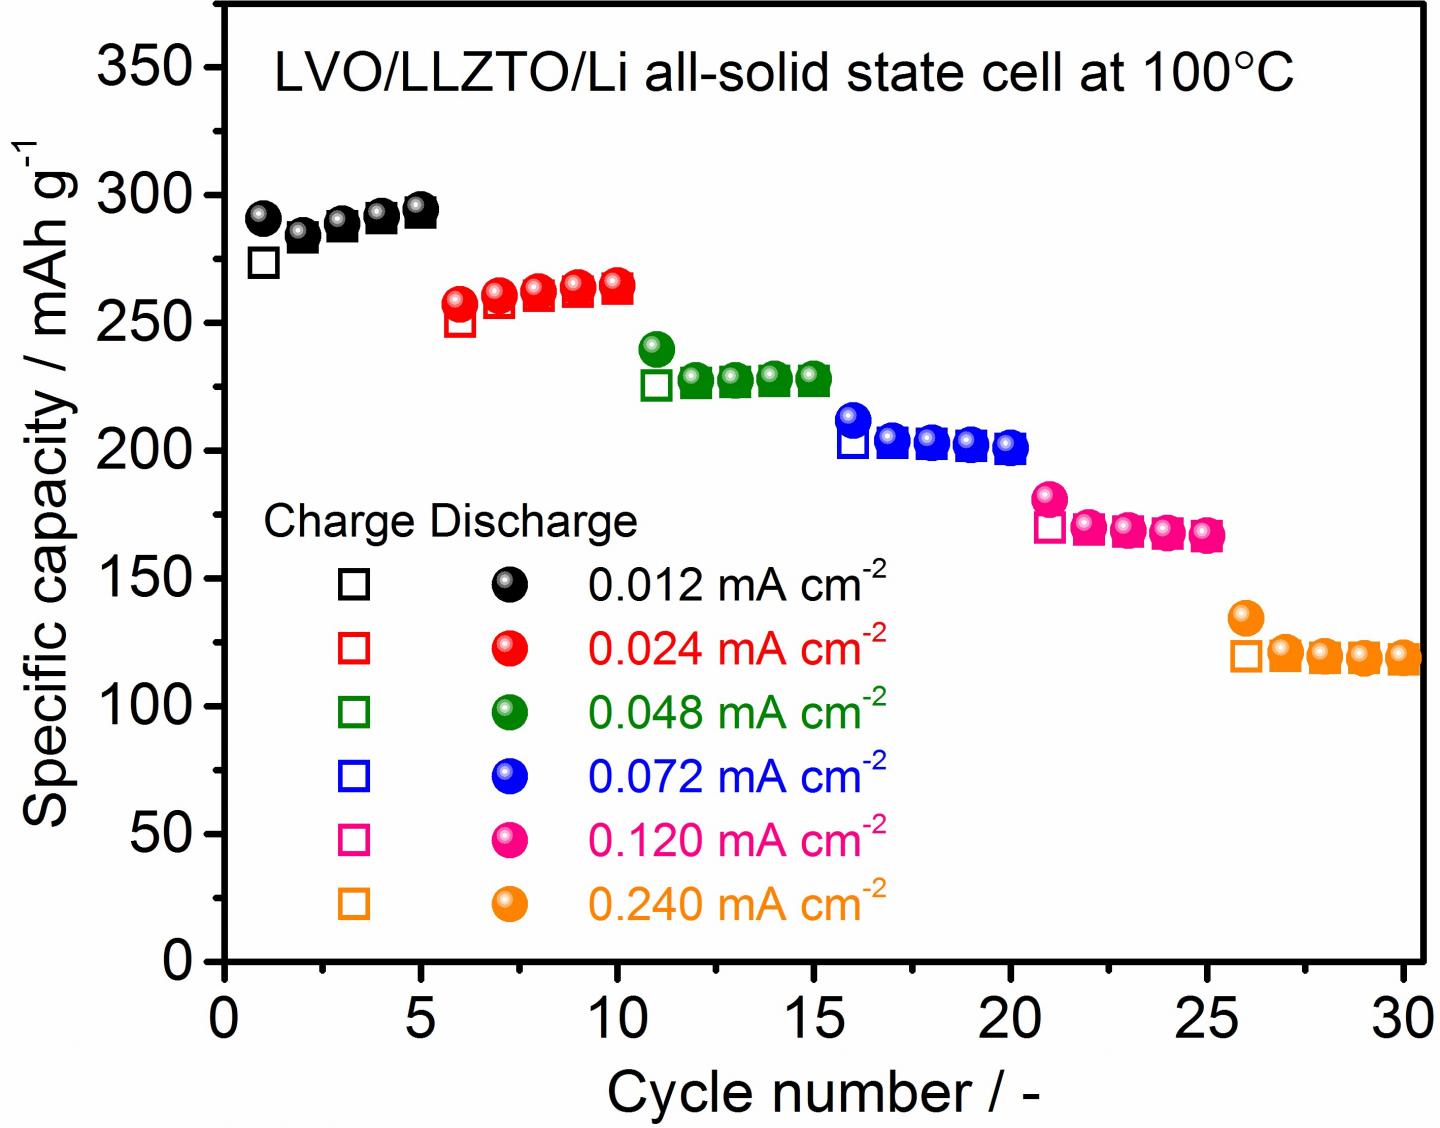 Cycling Stability of the LVO/LLZTO/Li Solid-state Cell